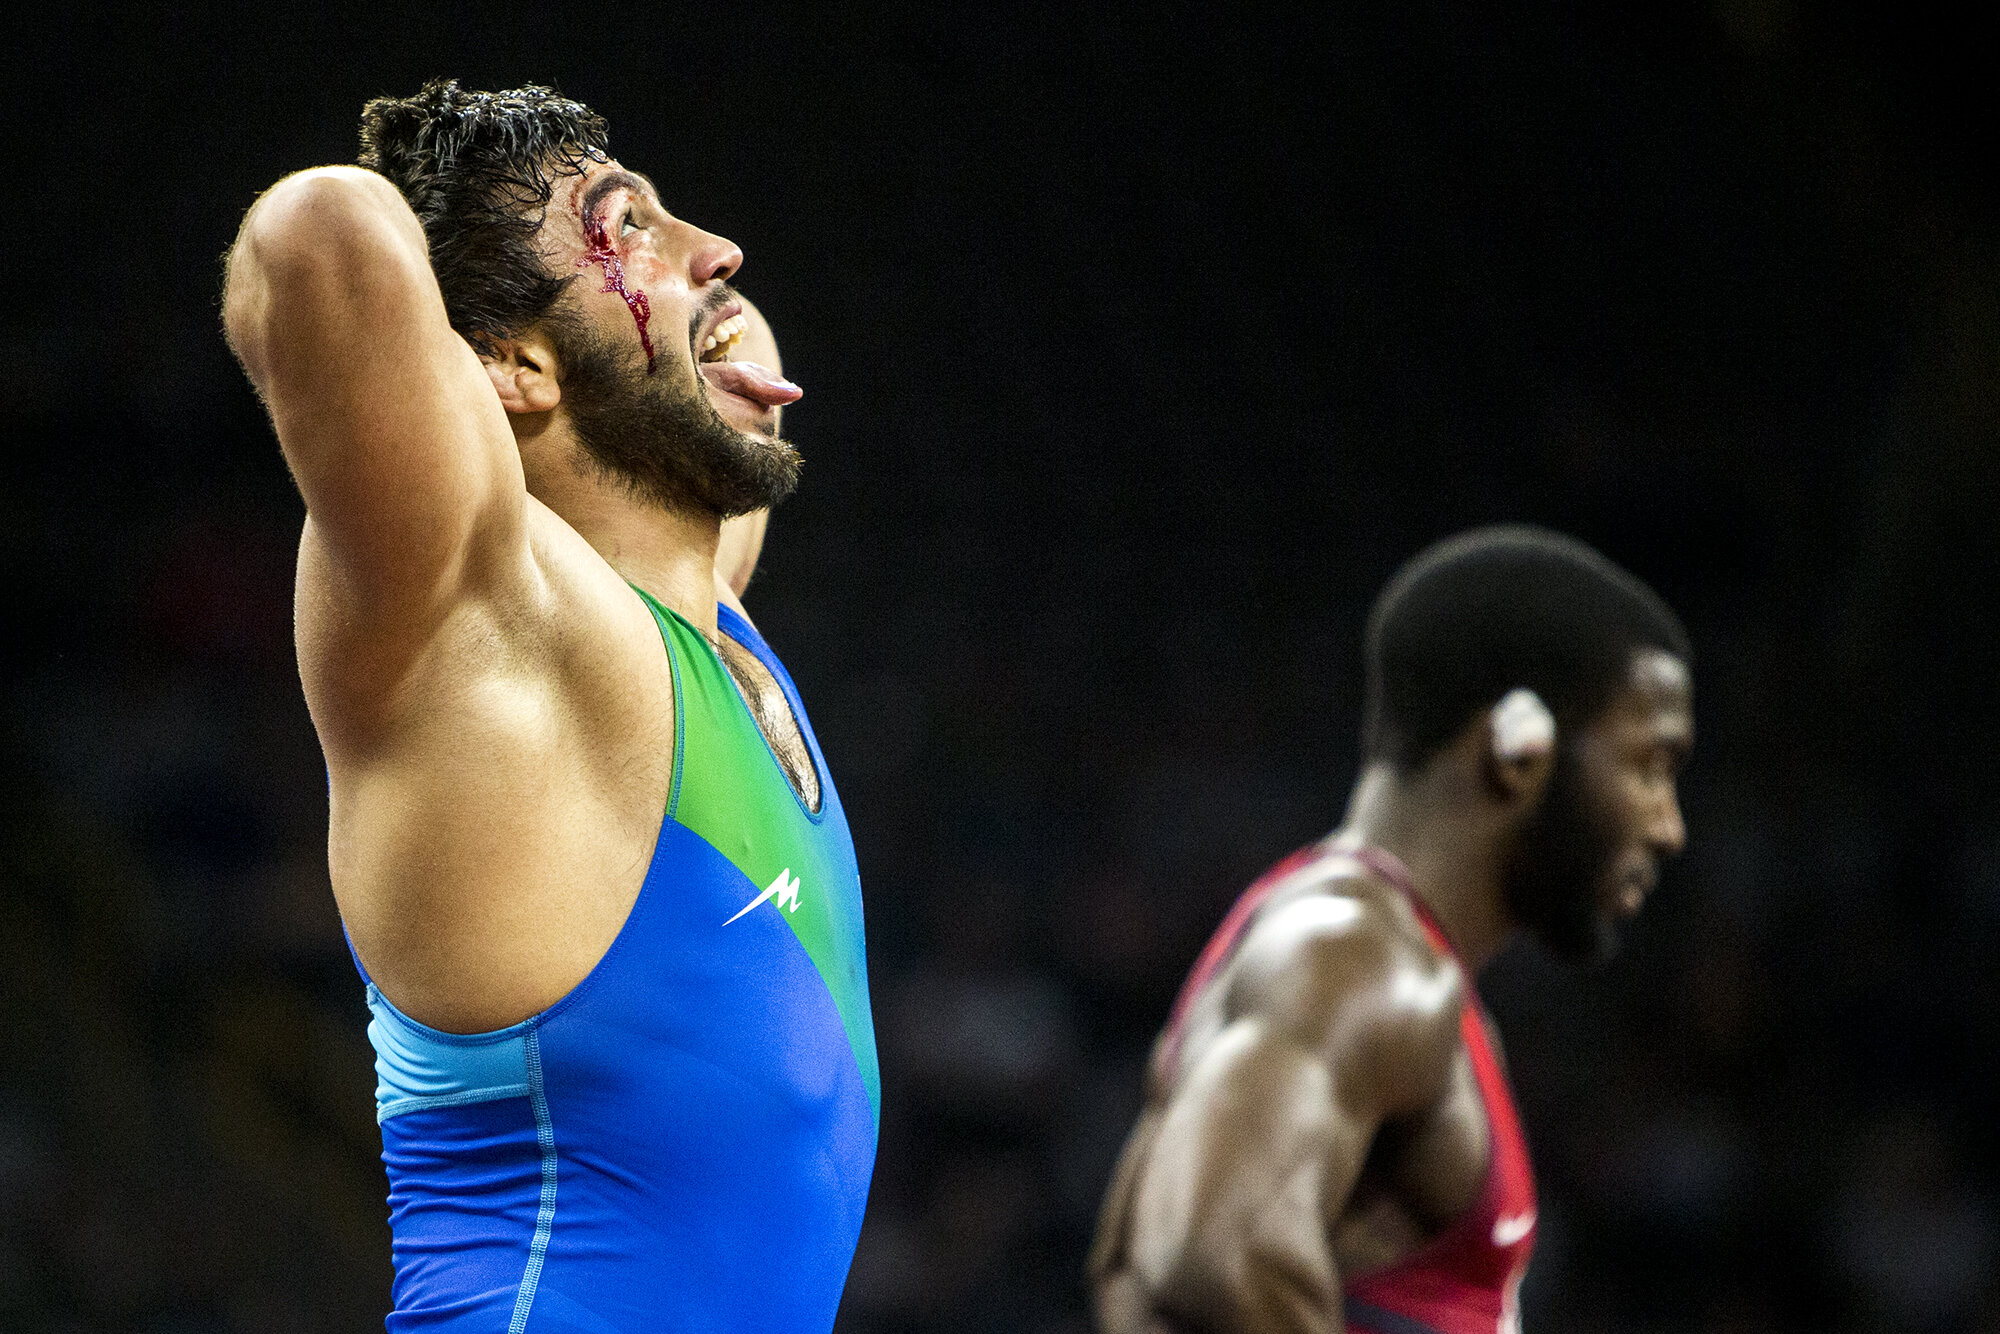  Joshgun Azimov (blue) of Azerbaijan reacts to his victory over America's James Green at 70 kg during the final round of the 2018 Men's Freestyle World Cup at Carver-Hawkeye Arena, April 7, 2018 in Iowa City, Iowa. 